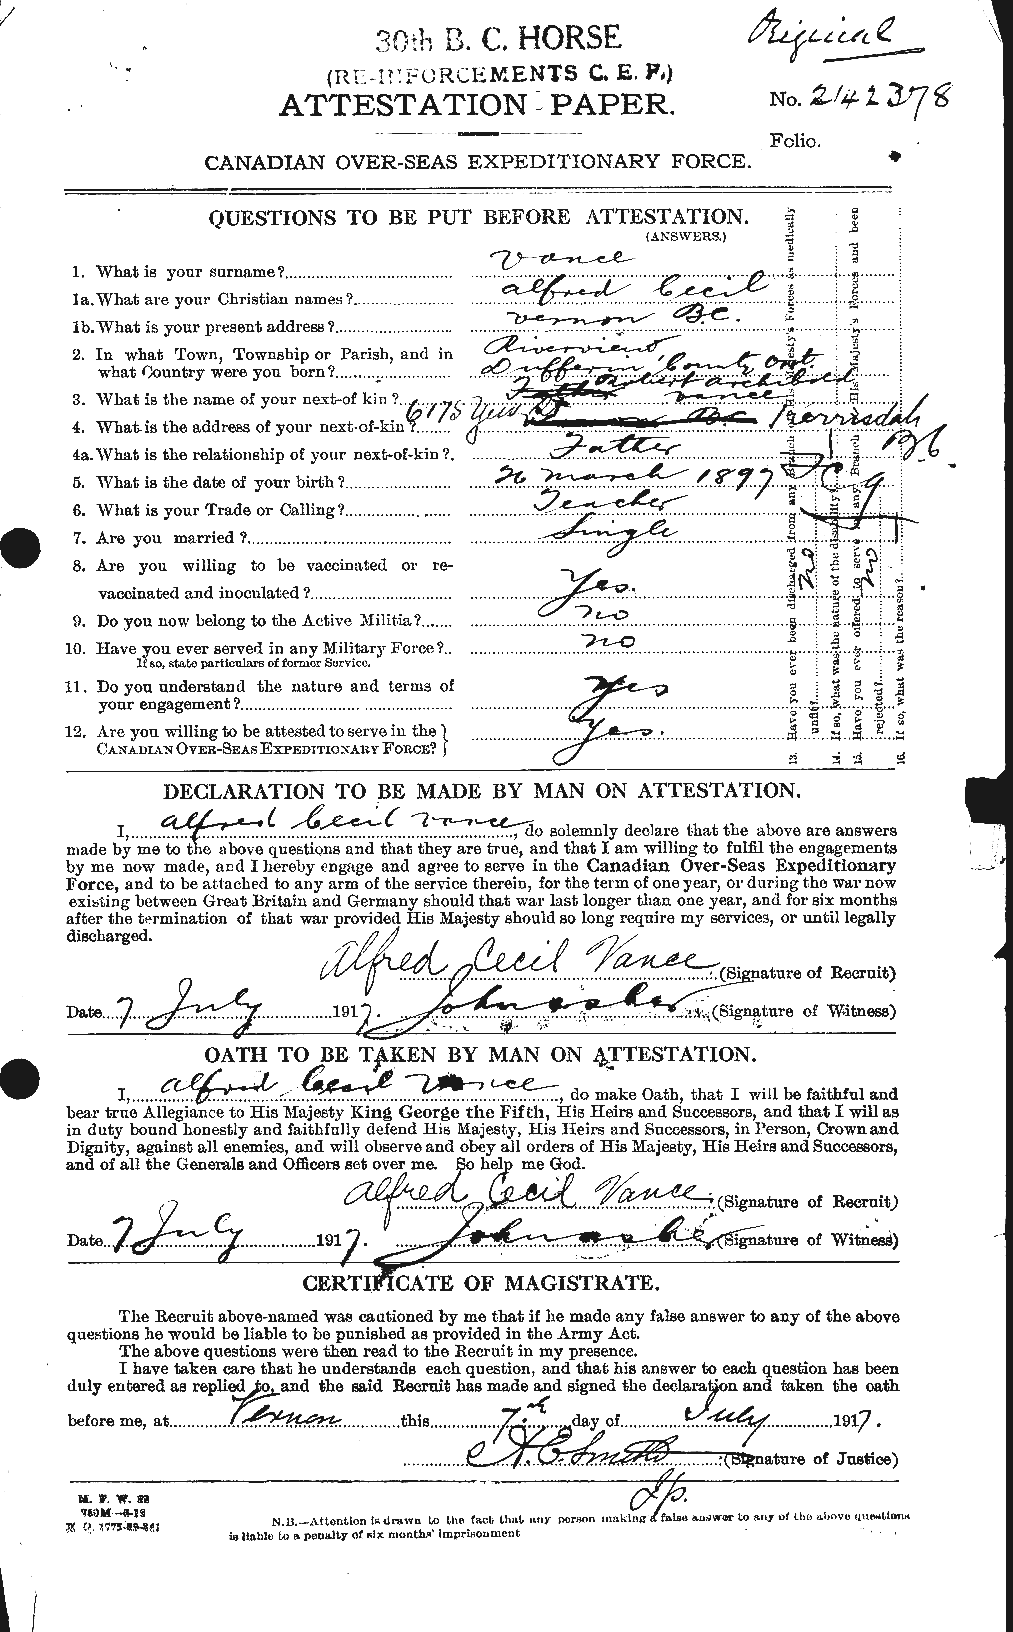 Personnel Records of the First World War - CEF 646692a